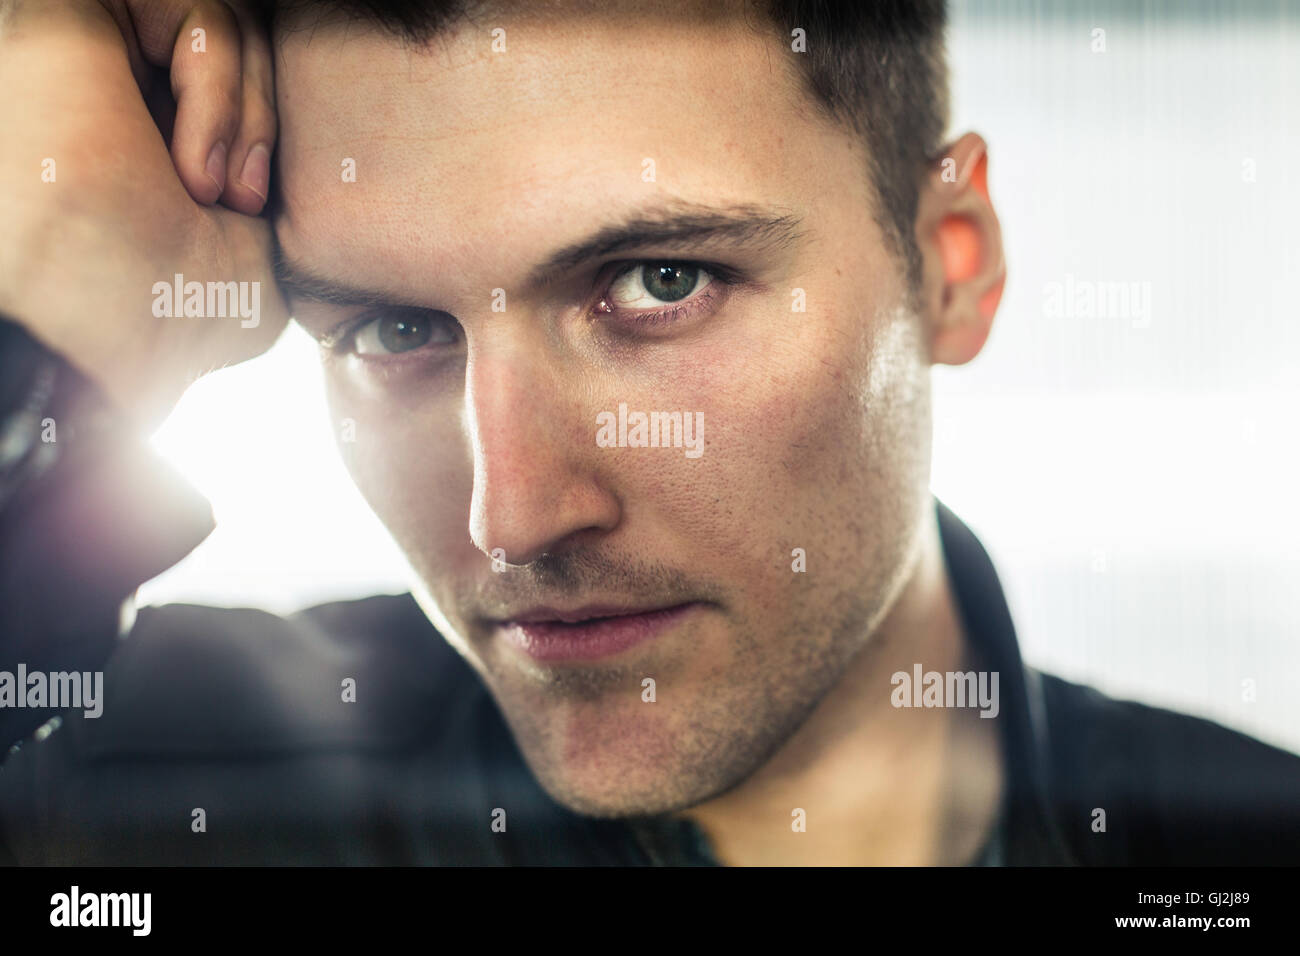 Close up portrait of young man, hand on head, looking at camera Stock Photo